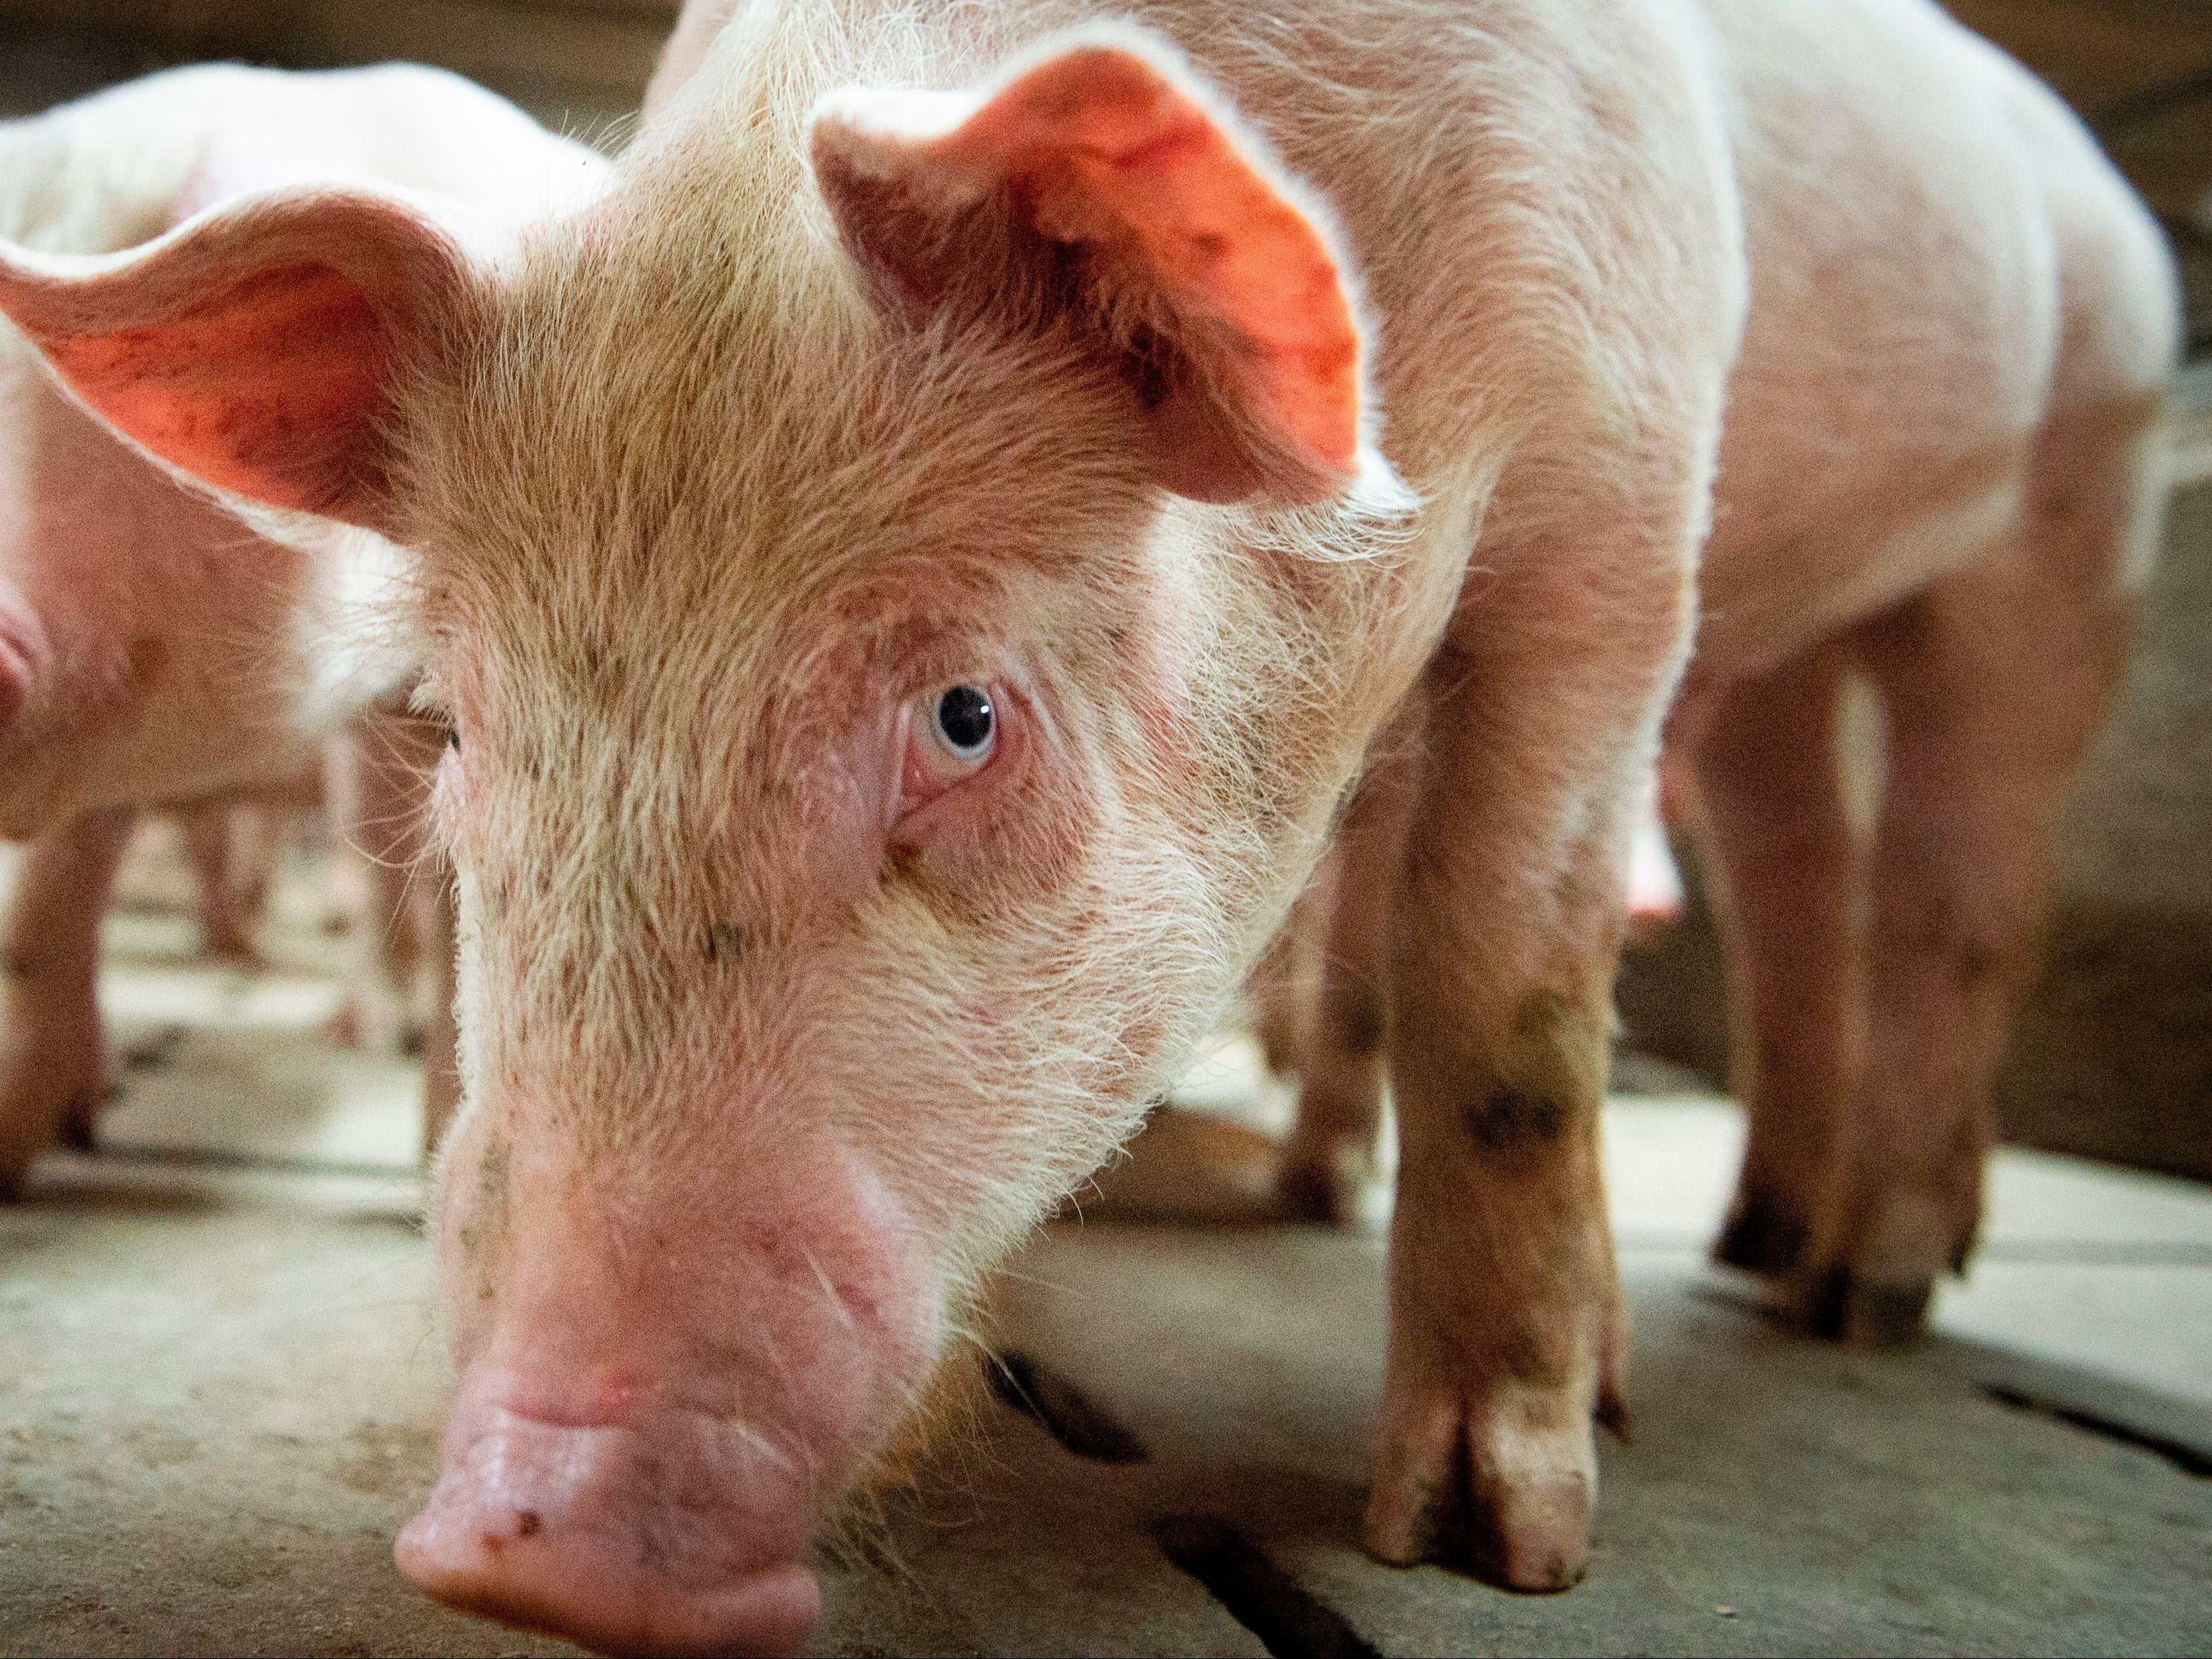 The UK government formally recognises that pigs are sentient beings